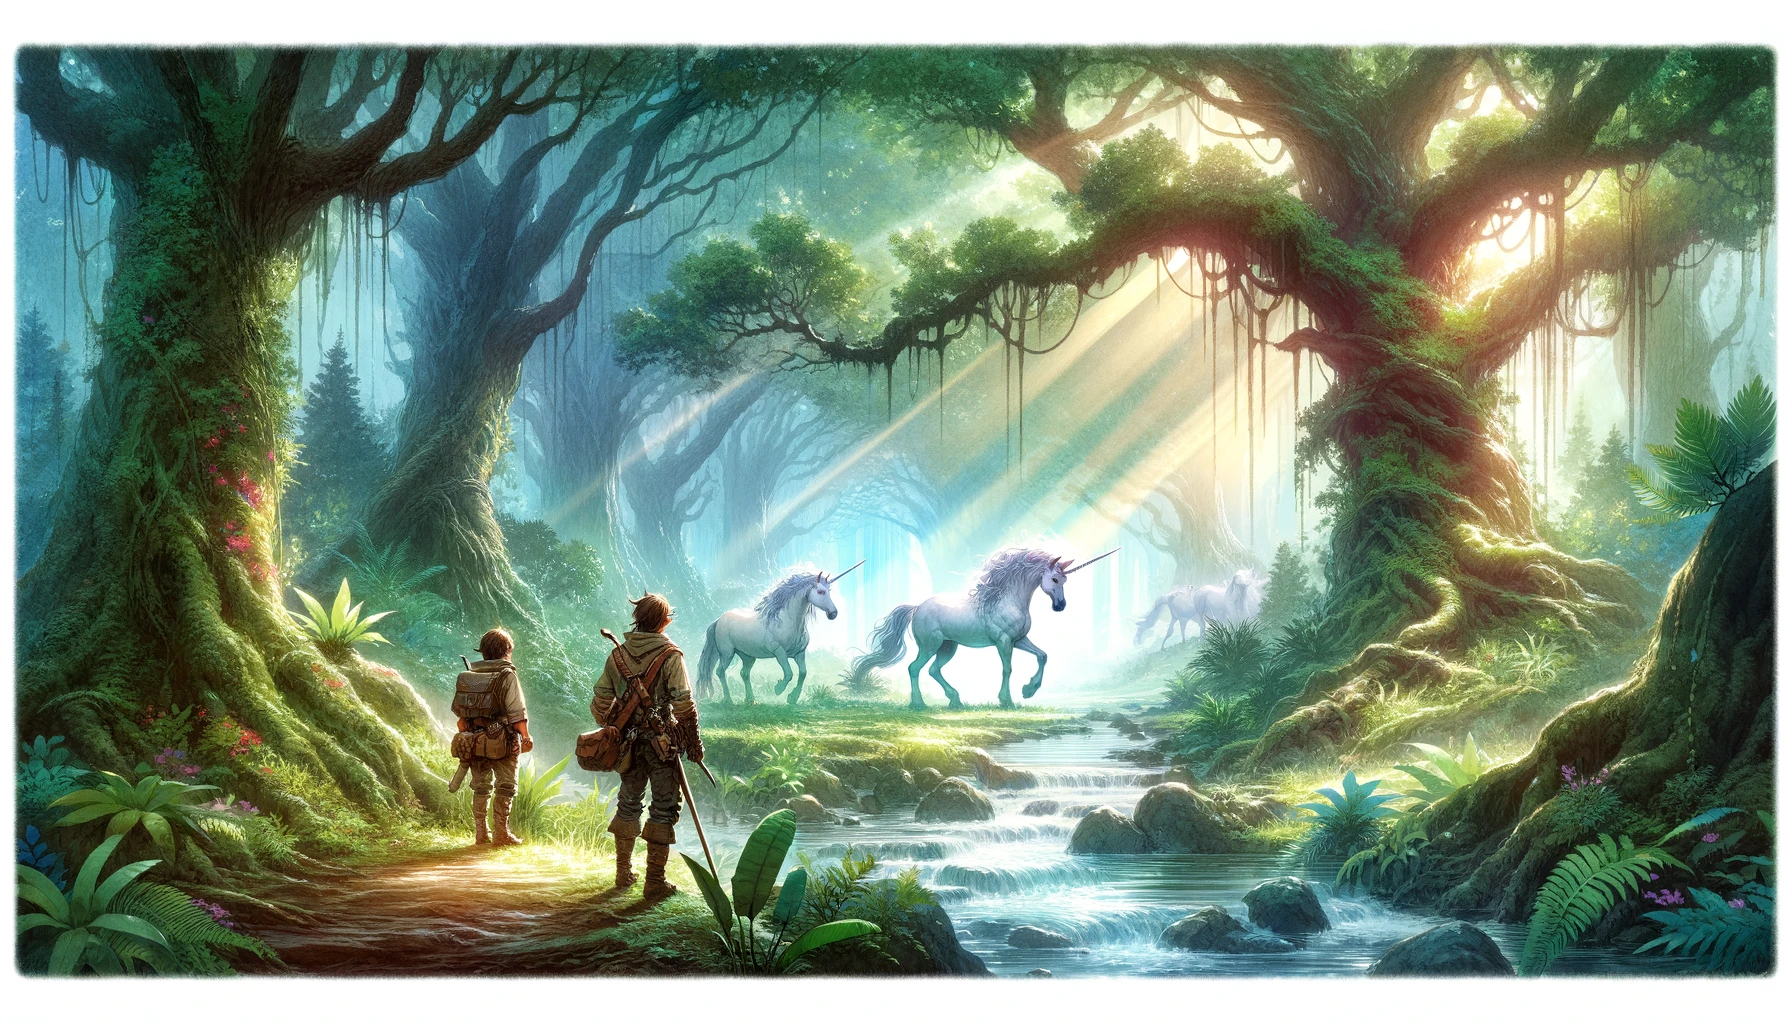 In this wide watercolor scene, two adventurers cautiously approach a serene glade where unicorns gather. The scene features lush greenery, ancient trees, and a gentle stream. The unicorns are majestic, with one particularly striking unicorn at the center, its horn glowing faintly. Sunlight filters through the canopy, casting an ethereal glow over the scene, emphasizing the magical nature of the glade.